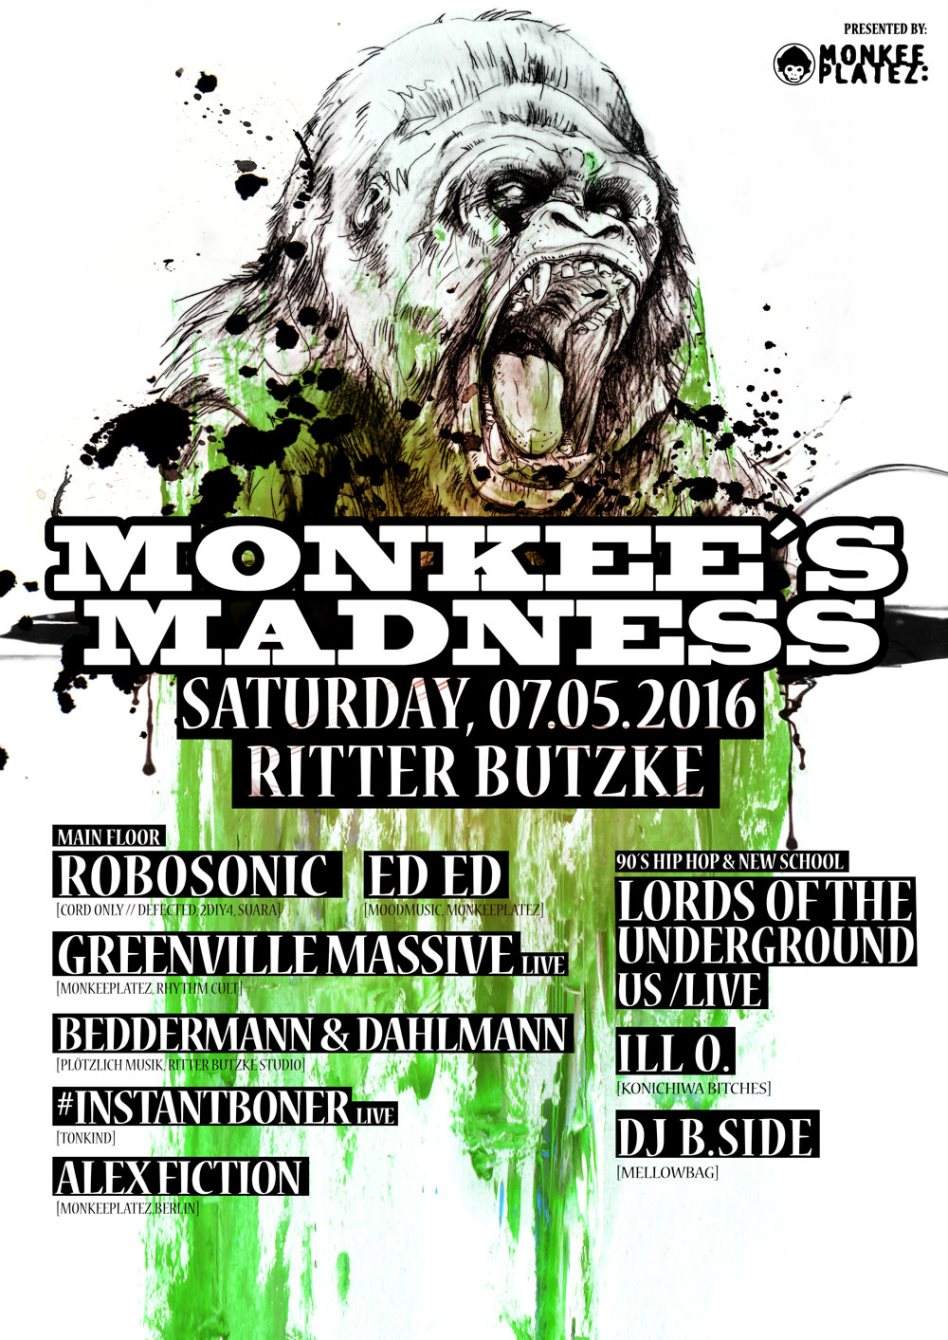 Monkees Madness with Robosonic, ED ED, Lords of the Underground, Greenville Massive & Many More - フライヤー表